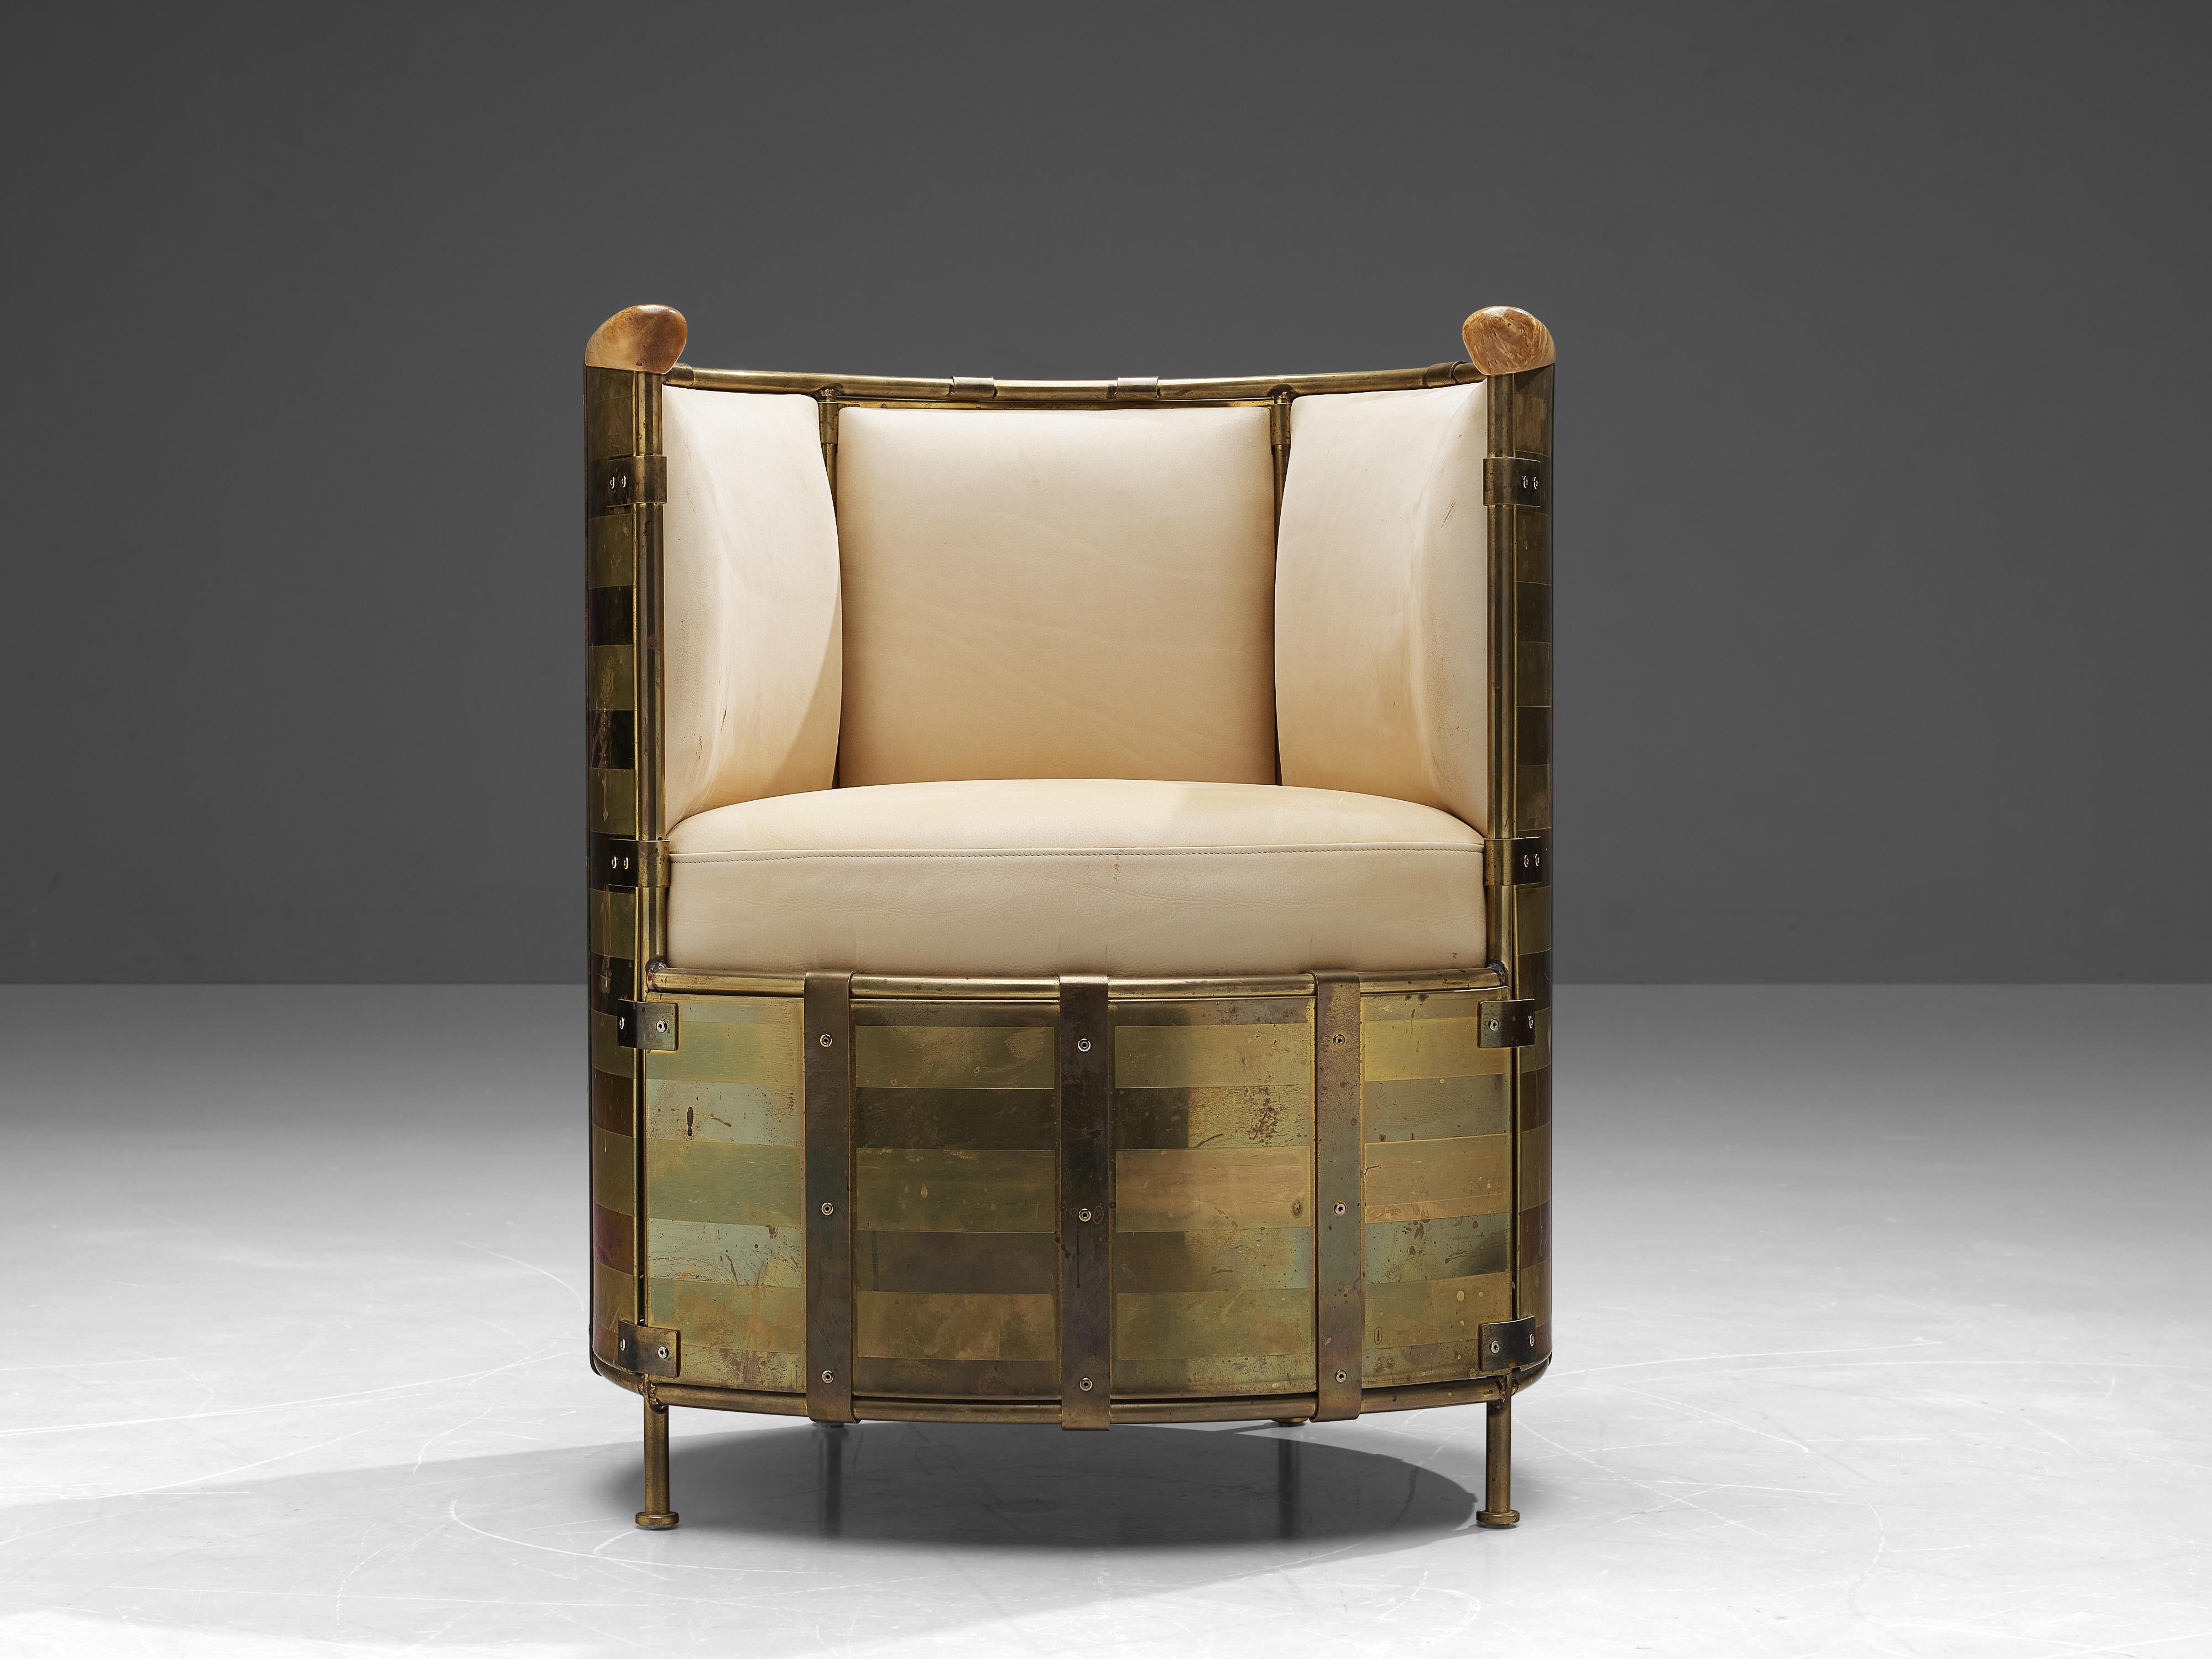 Mats Theselius for Källemo AB, lounge chair 'El Dorado, brass, birch, leather, Sweden, 2002

This distinct 'El Dorado' lounge chair of Mats Theselius was designed in 2002. It features a body of brass on four legs. The round form is finished on top